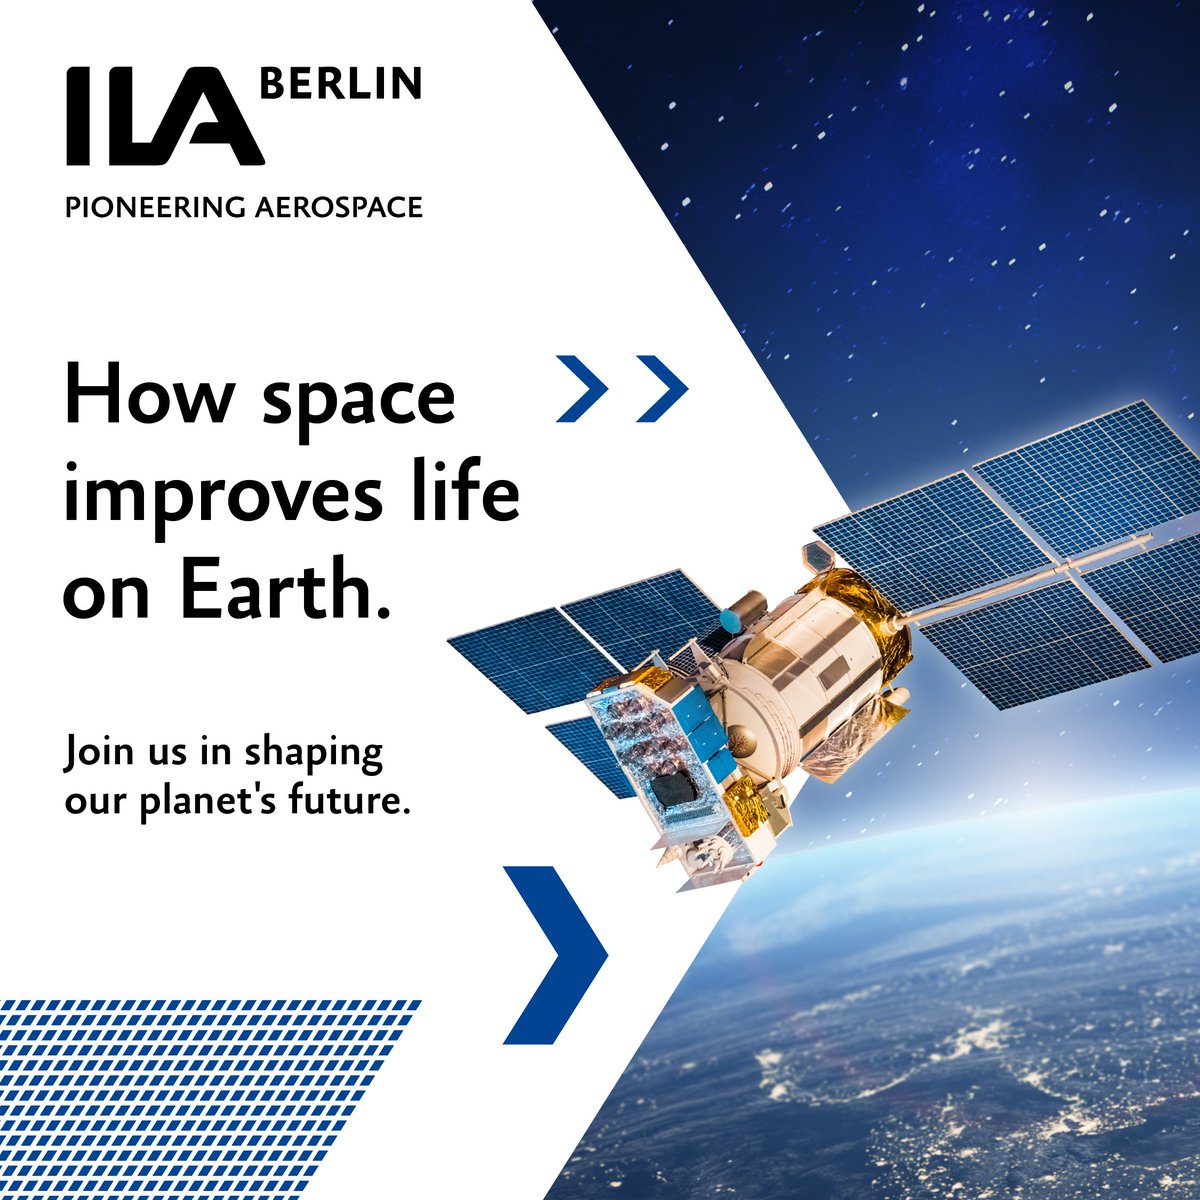 HOW SPACE IMPROVES LIFE ON EARTH. Join us in shaping our planet's future. How can we secure the future of our planet with space technology? Find out - at #ILA24. #PioneeringAerospace #sponsored ila-berlin.de/de?utm_campaig… #sponsored